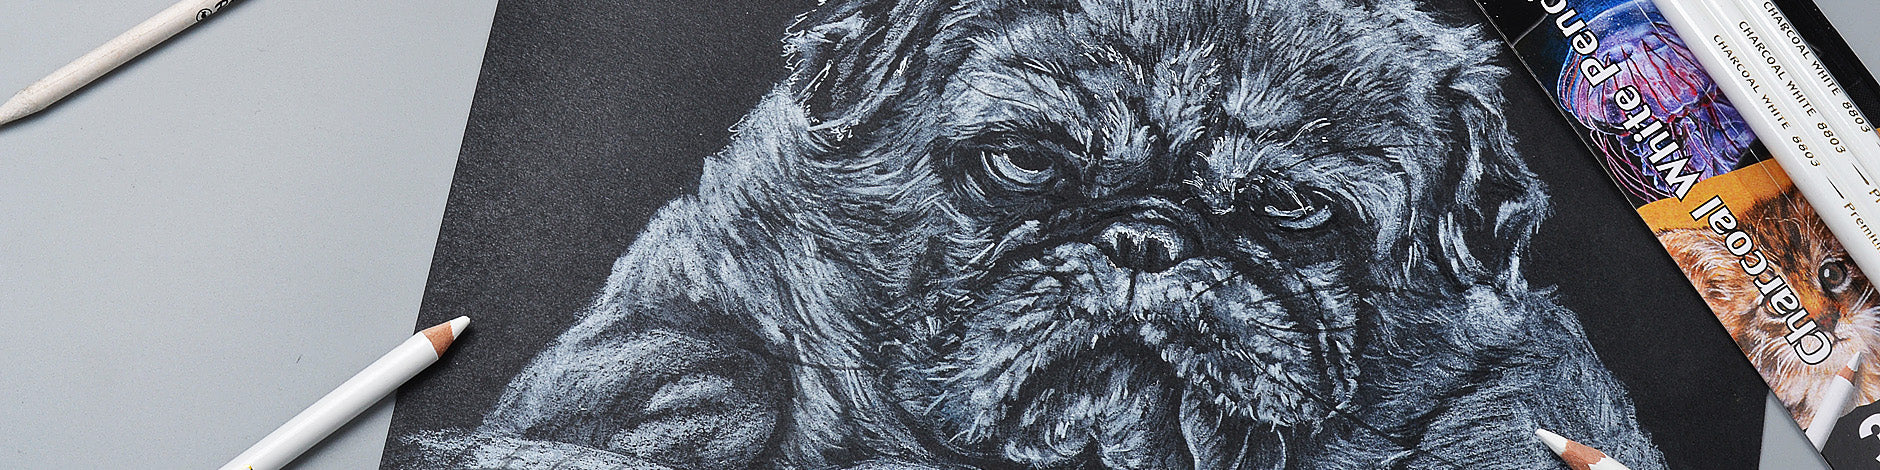 Charcoal Drawing :: Behance